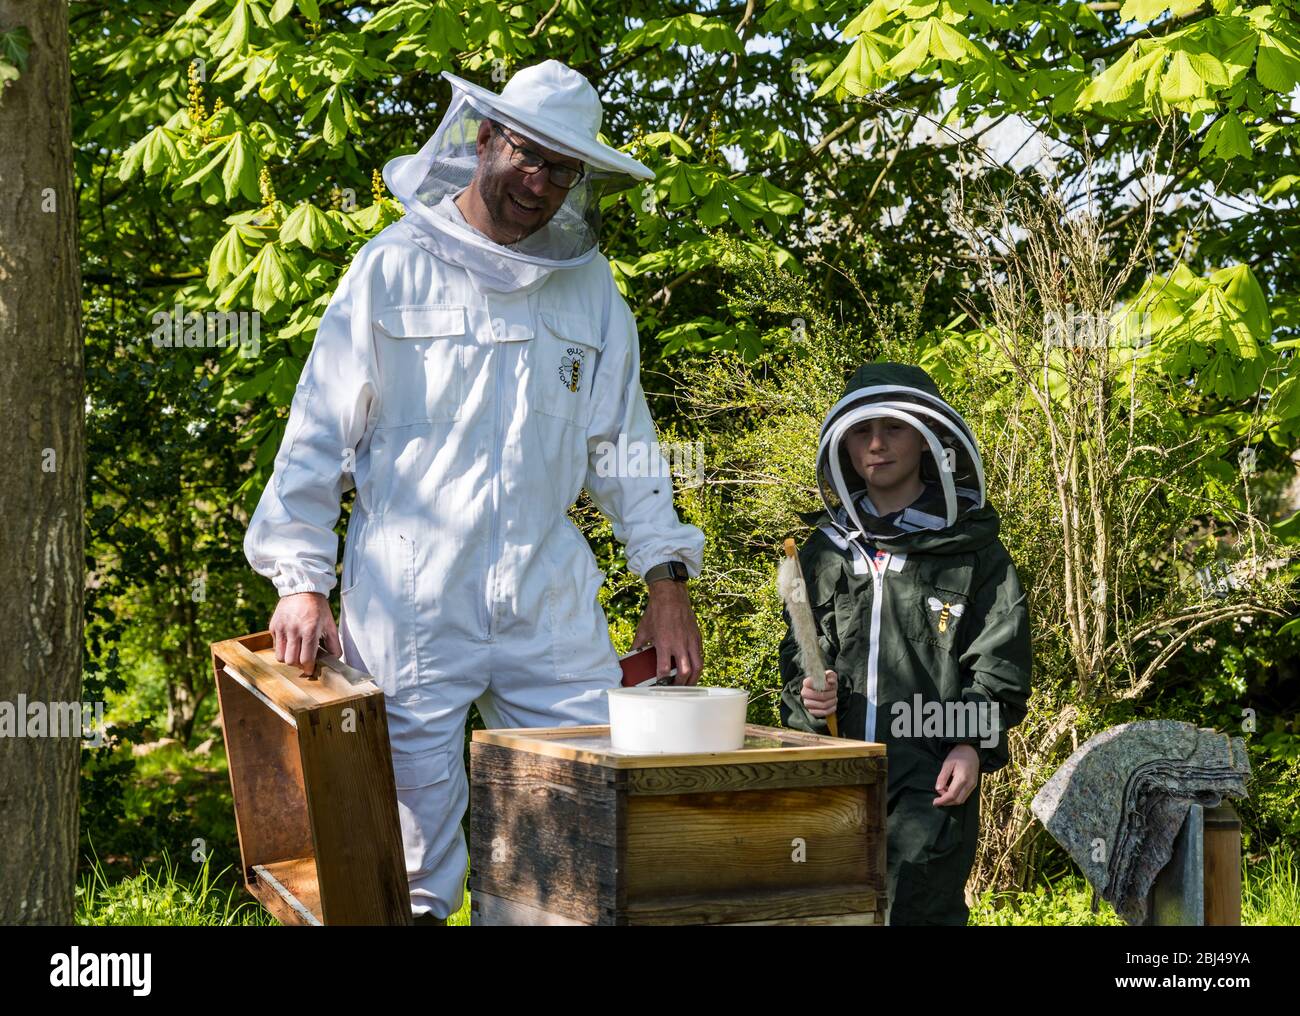 Camptoun, East Lothian, Scotland, United Kingdom. 28th Apr, 2020. A community in lockdown: residents in a small rural community show what life in lockdown is like for them. Pictured: Shane and his son Charlie, aged 9 years, are in their second year of keeping honey bees and hope to produce jars of honey this year. The hive contains around 20,000 bees Stock Photo